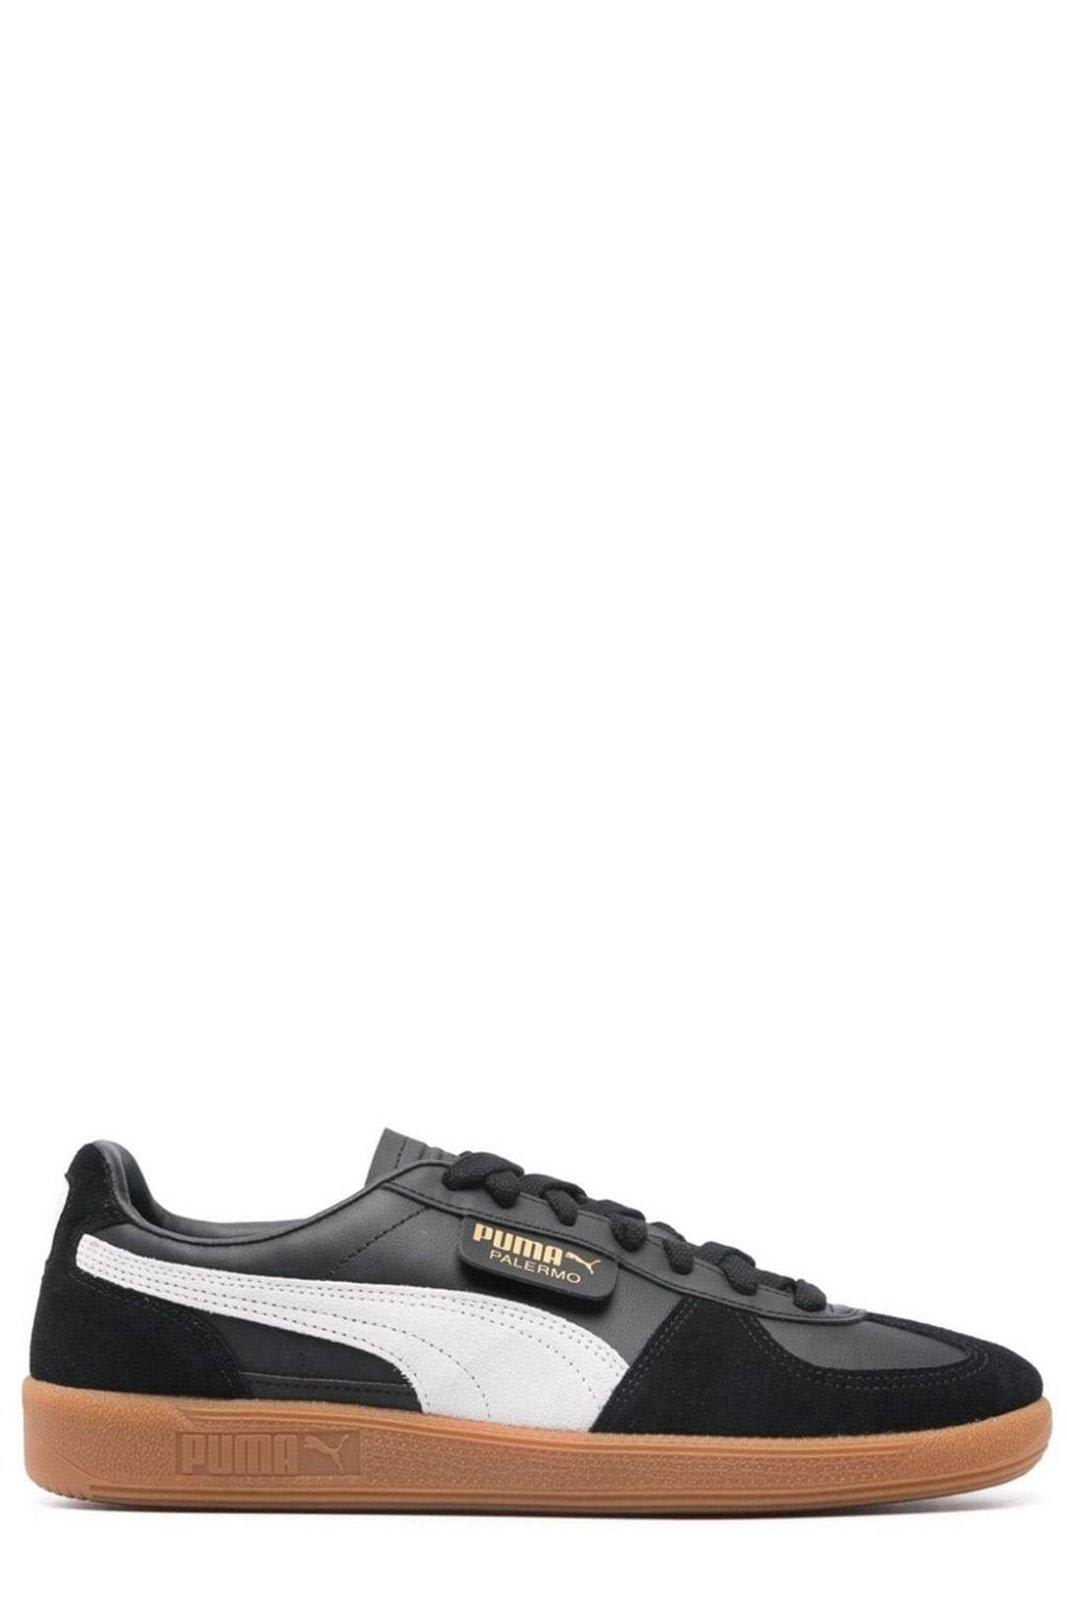 Shop Puma Palermo Lace-up Sneakers In Black